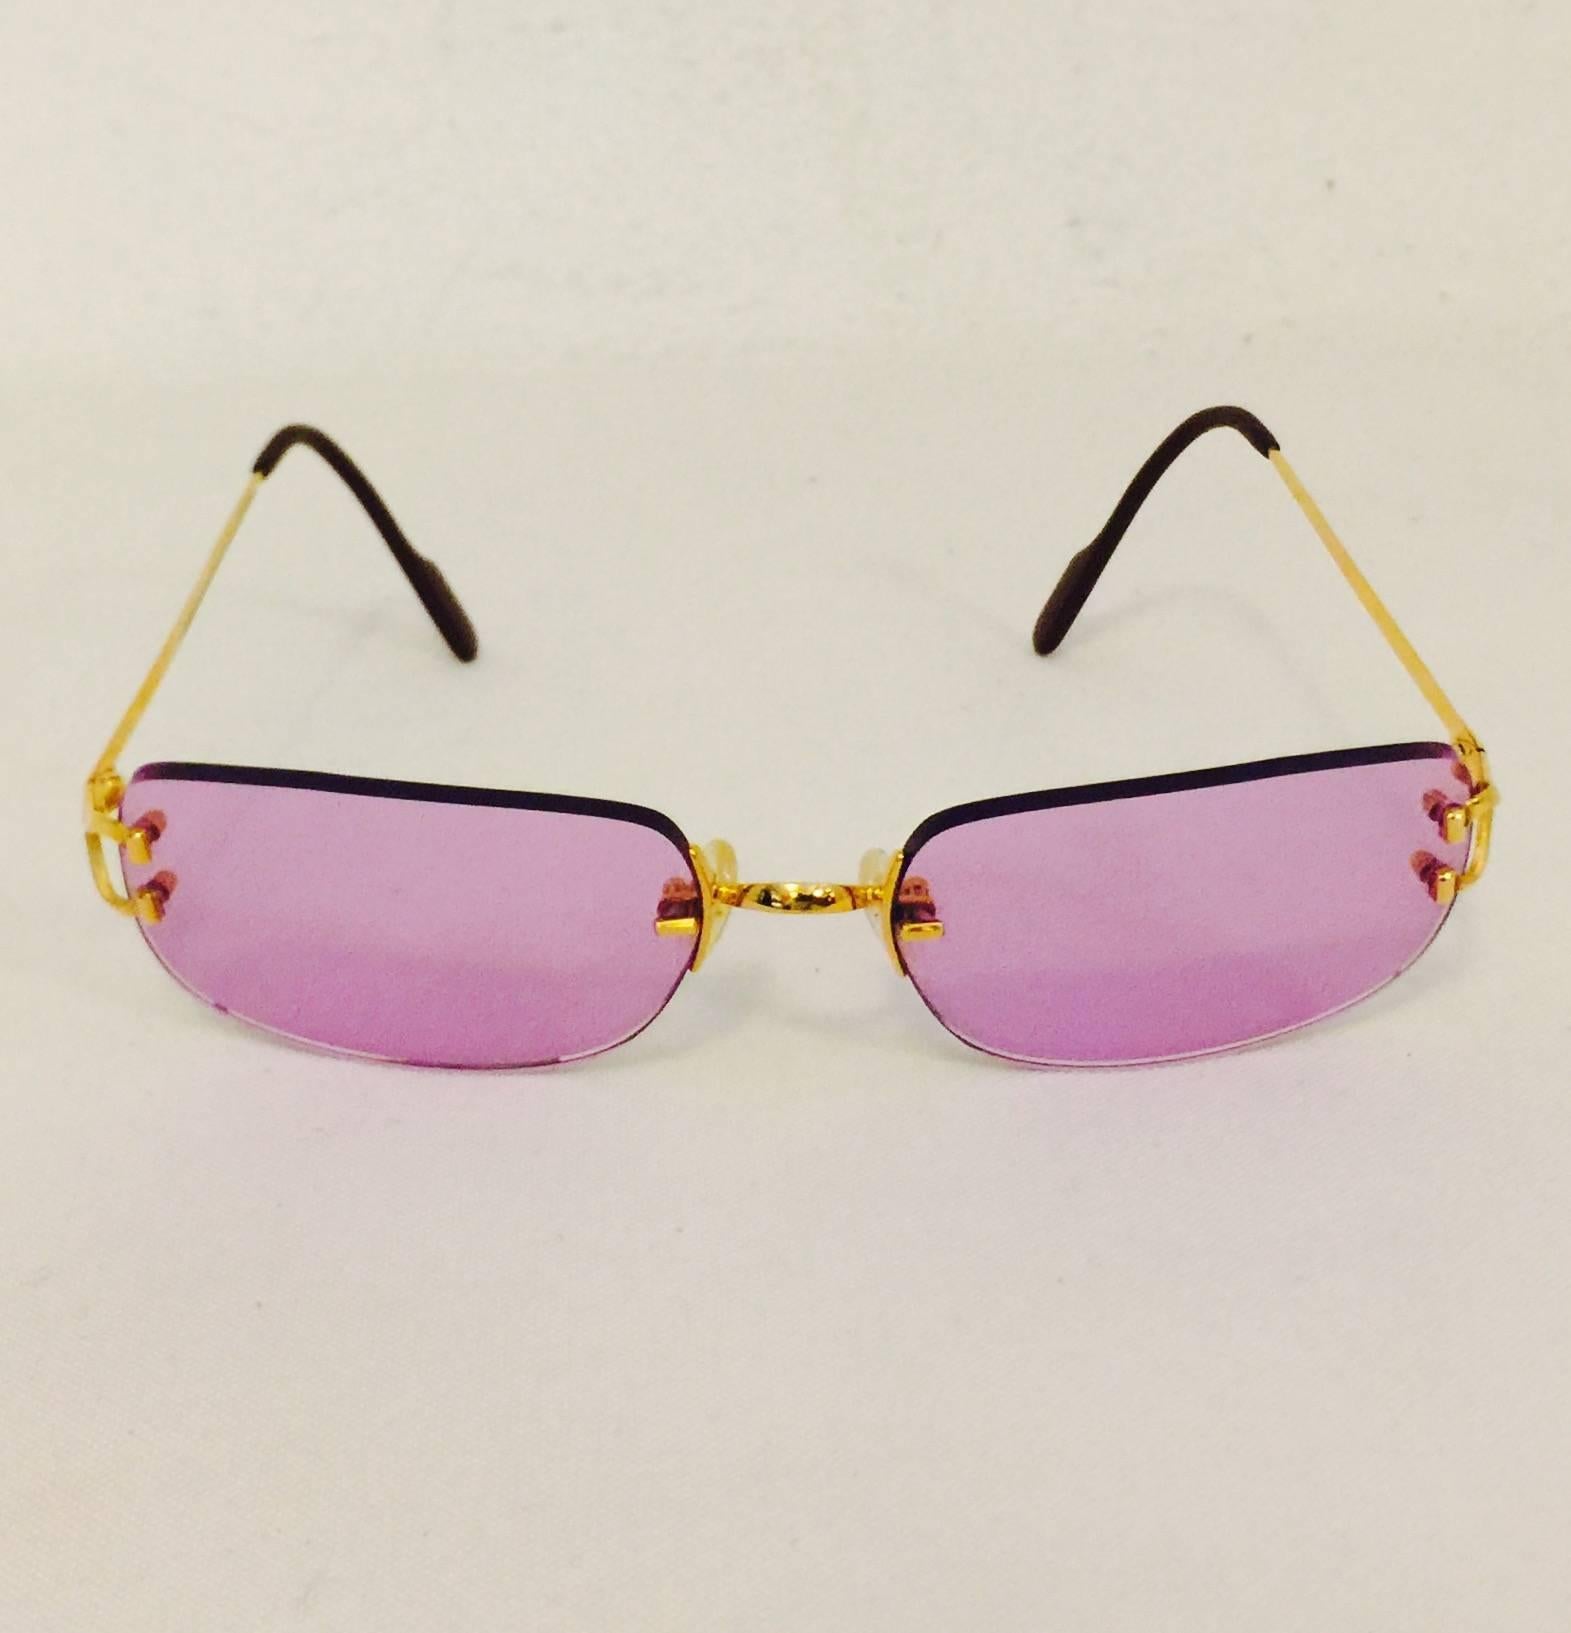 Cartier Rimless Sunglasses are a must for all connoisseurs of this legendary purveyor of fine gems!  Features sophisticated rounded, somewhat rectangular, lenses tinted a most feminine shade of rose pink.  Gold tone hardware finish the look!  Made